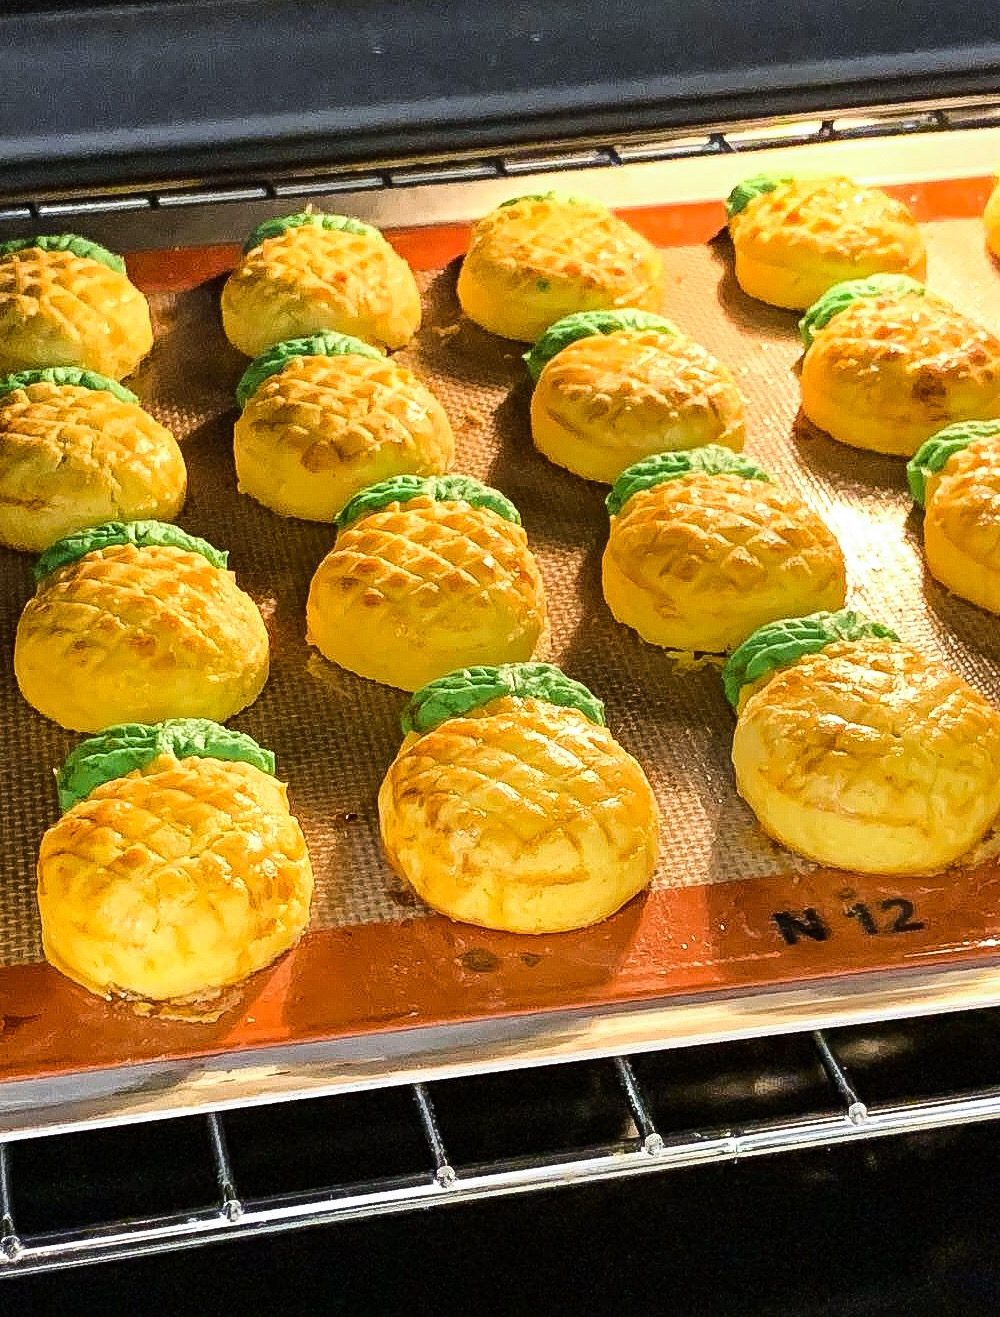 Tarts! Cookies! Dumplings! Celebrate Chinese New Year with these auspicious treats